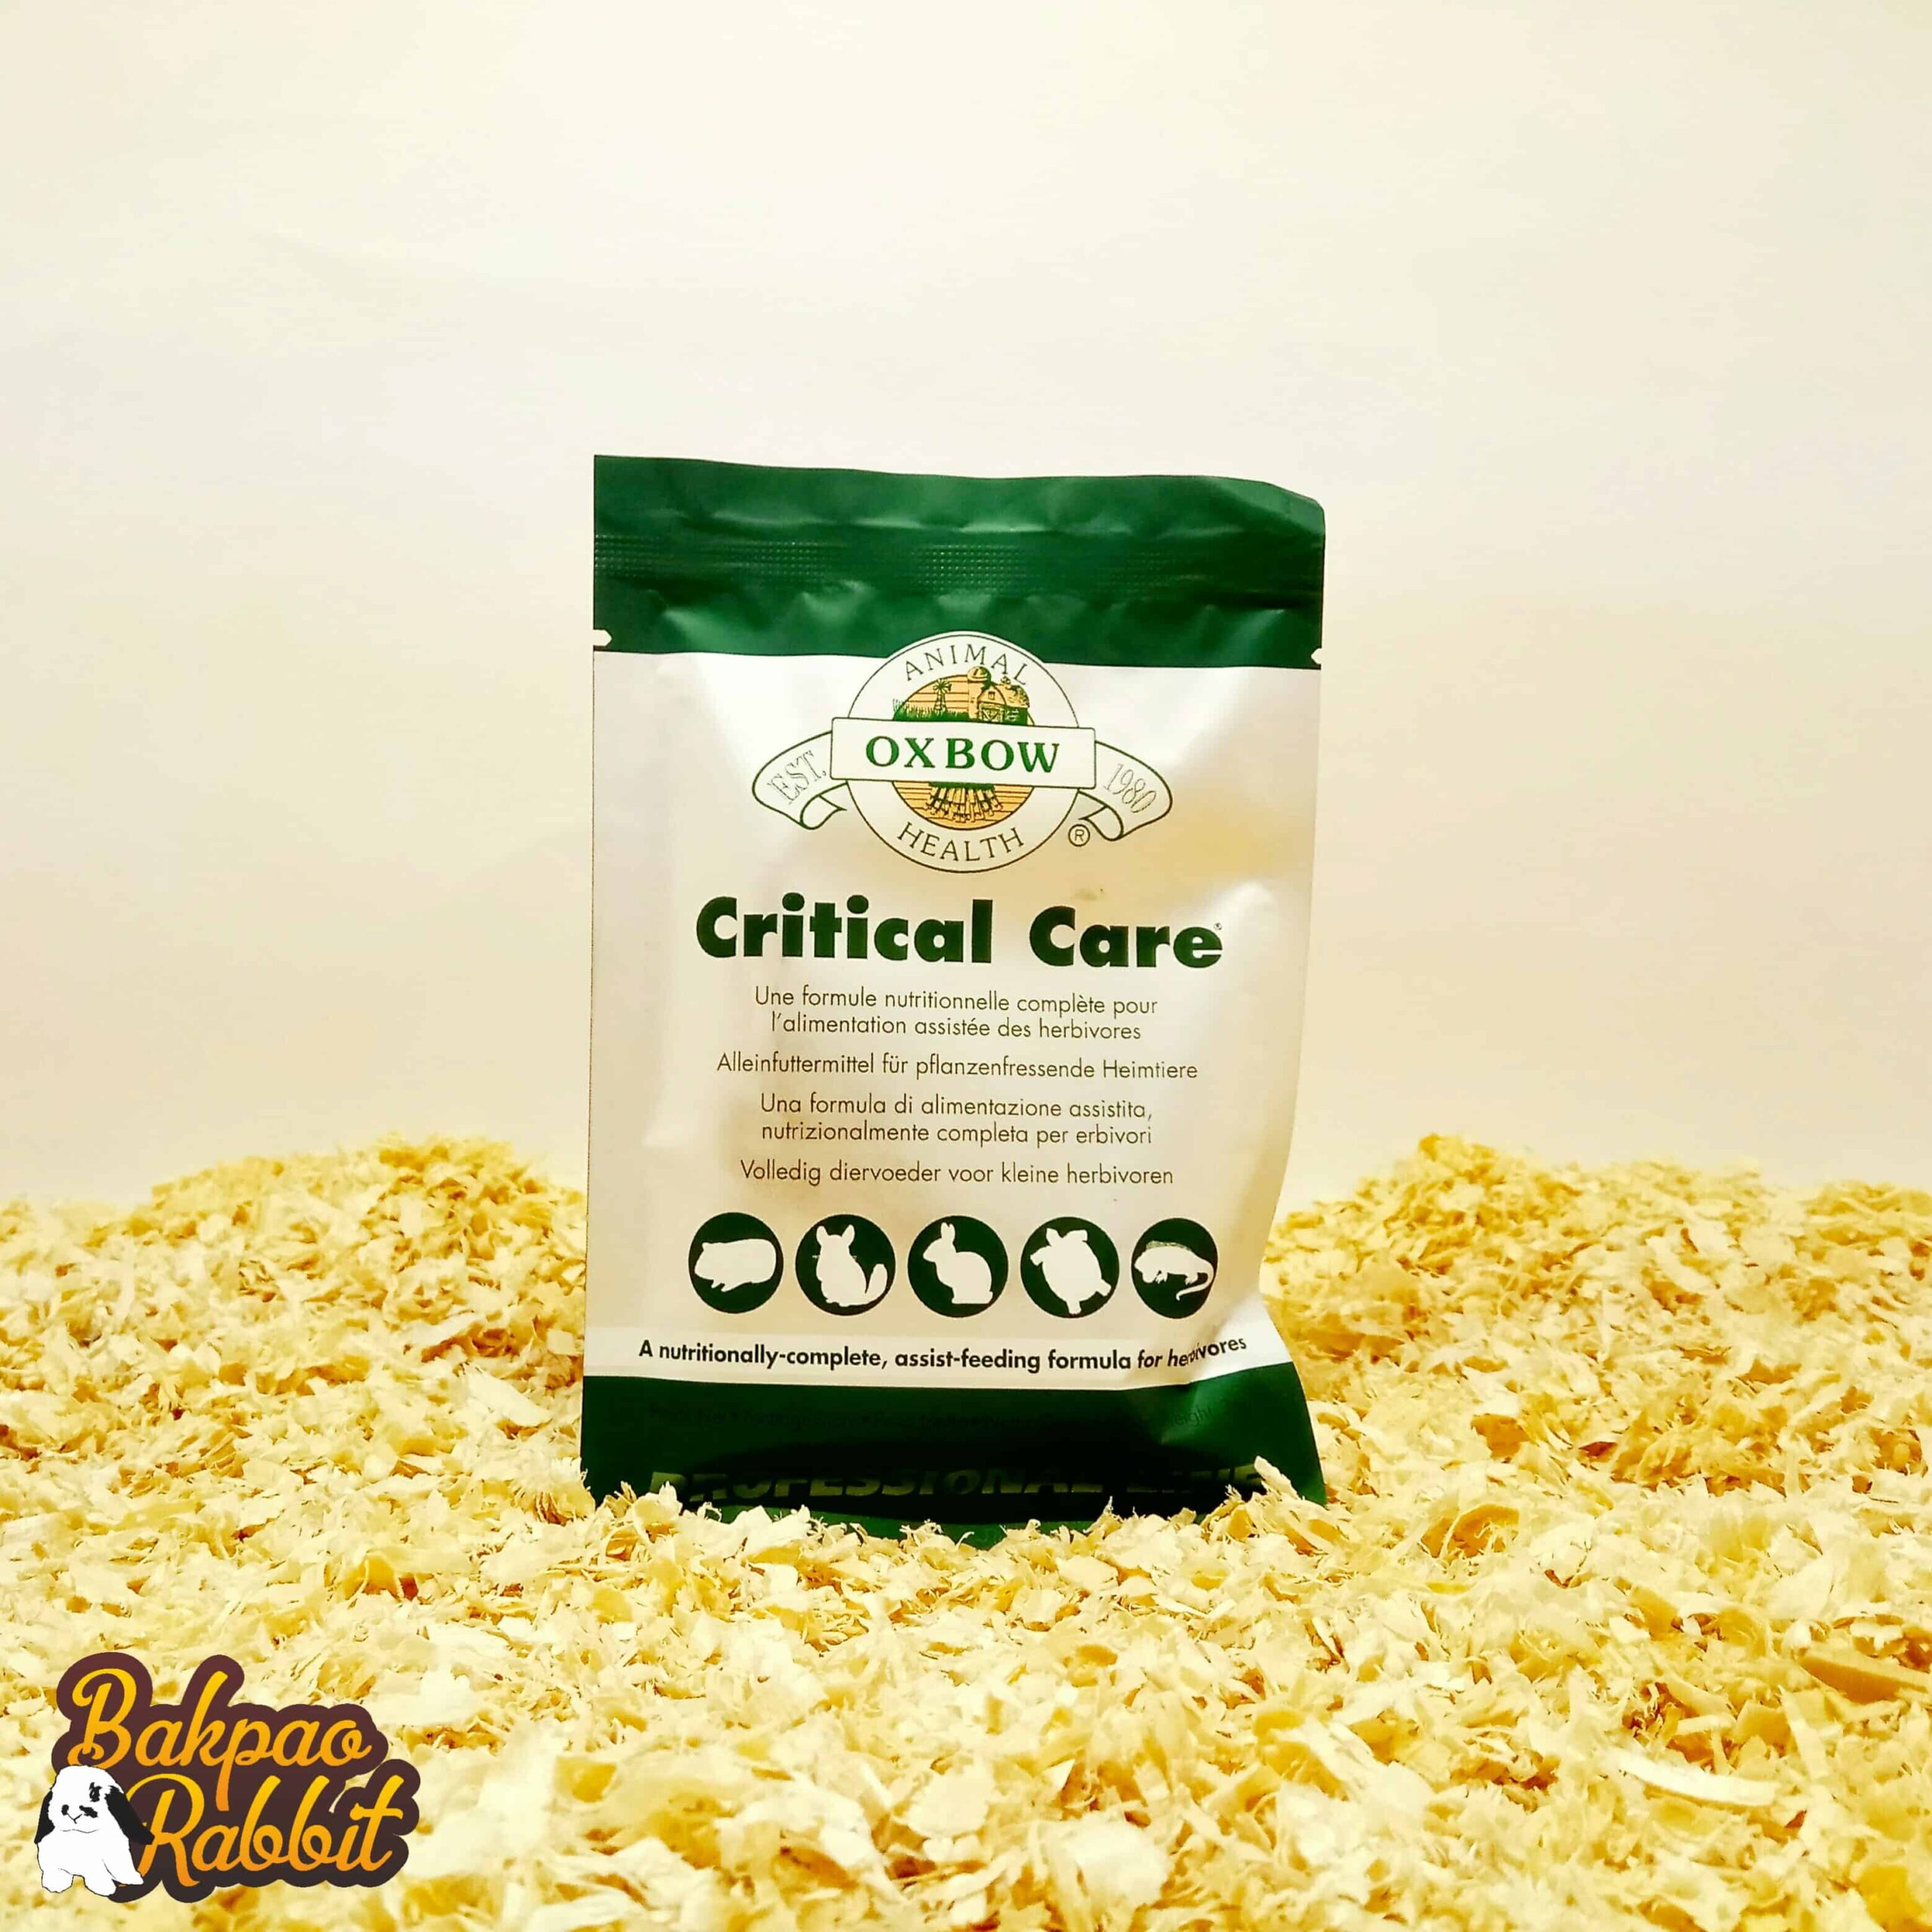 Oxbow Professional Line Critical Care 36g